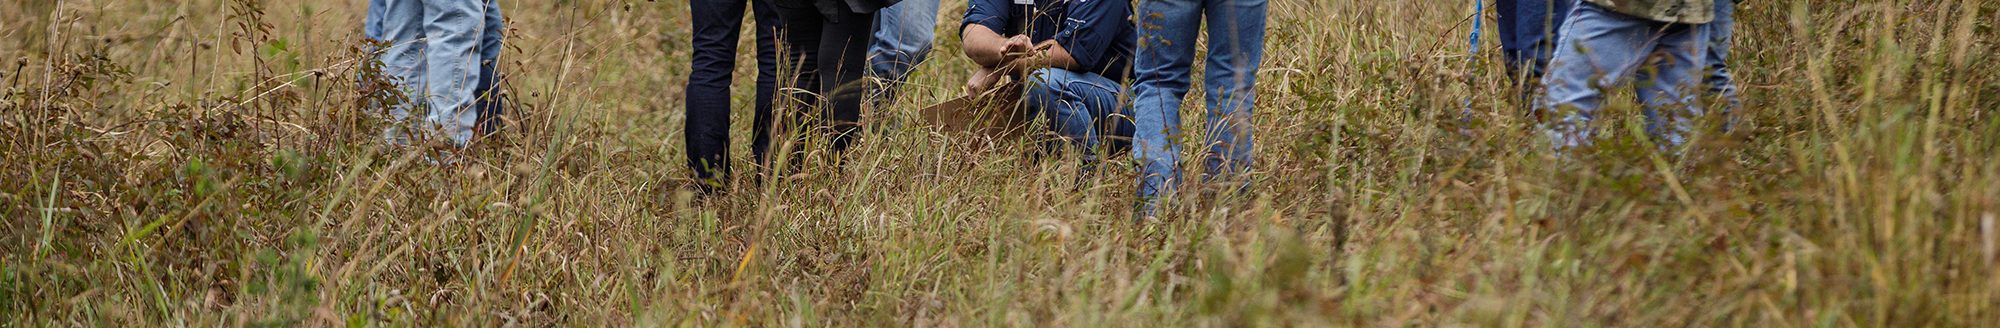 Farmers and ranchers at the first Essentials of Regenerative Grazing course evaluate forage in a pasture at Noble Research Institute, Ardmore, Oklahoma. (Photo courtesy of Noble Research Institute/Rob Mattson.)